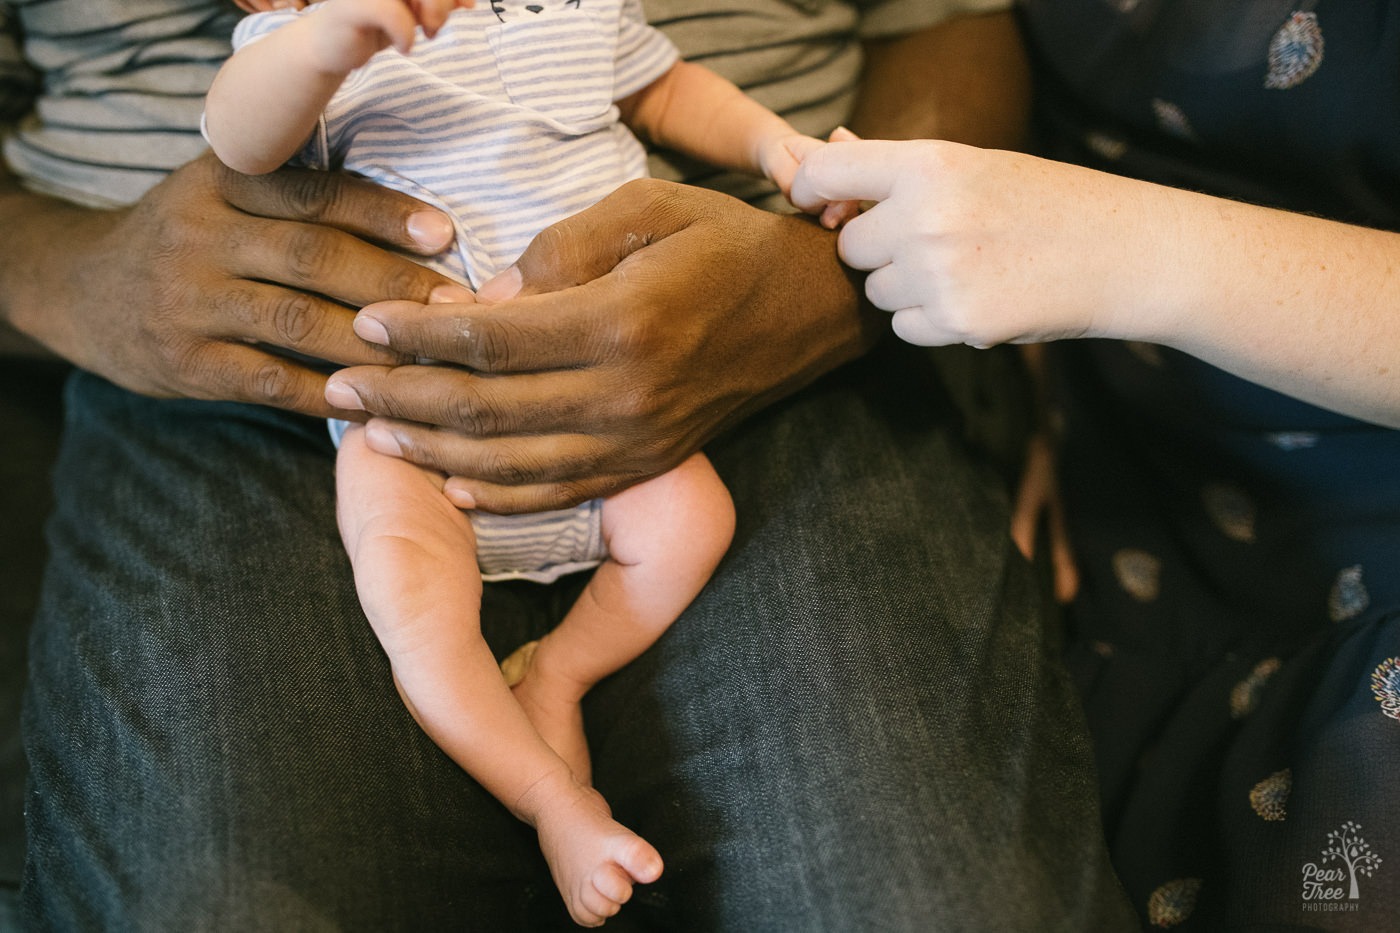 Inter-racial parent hands holding five day old newborn baby boy by his hand and around his belly.